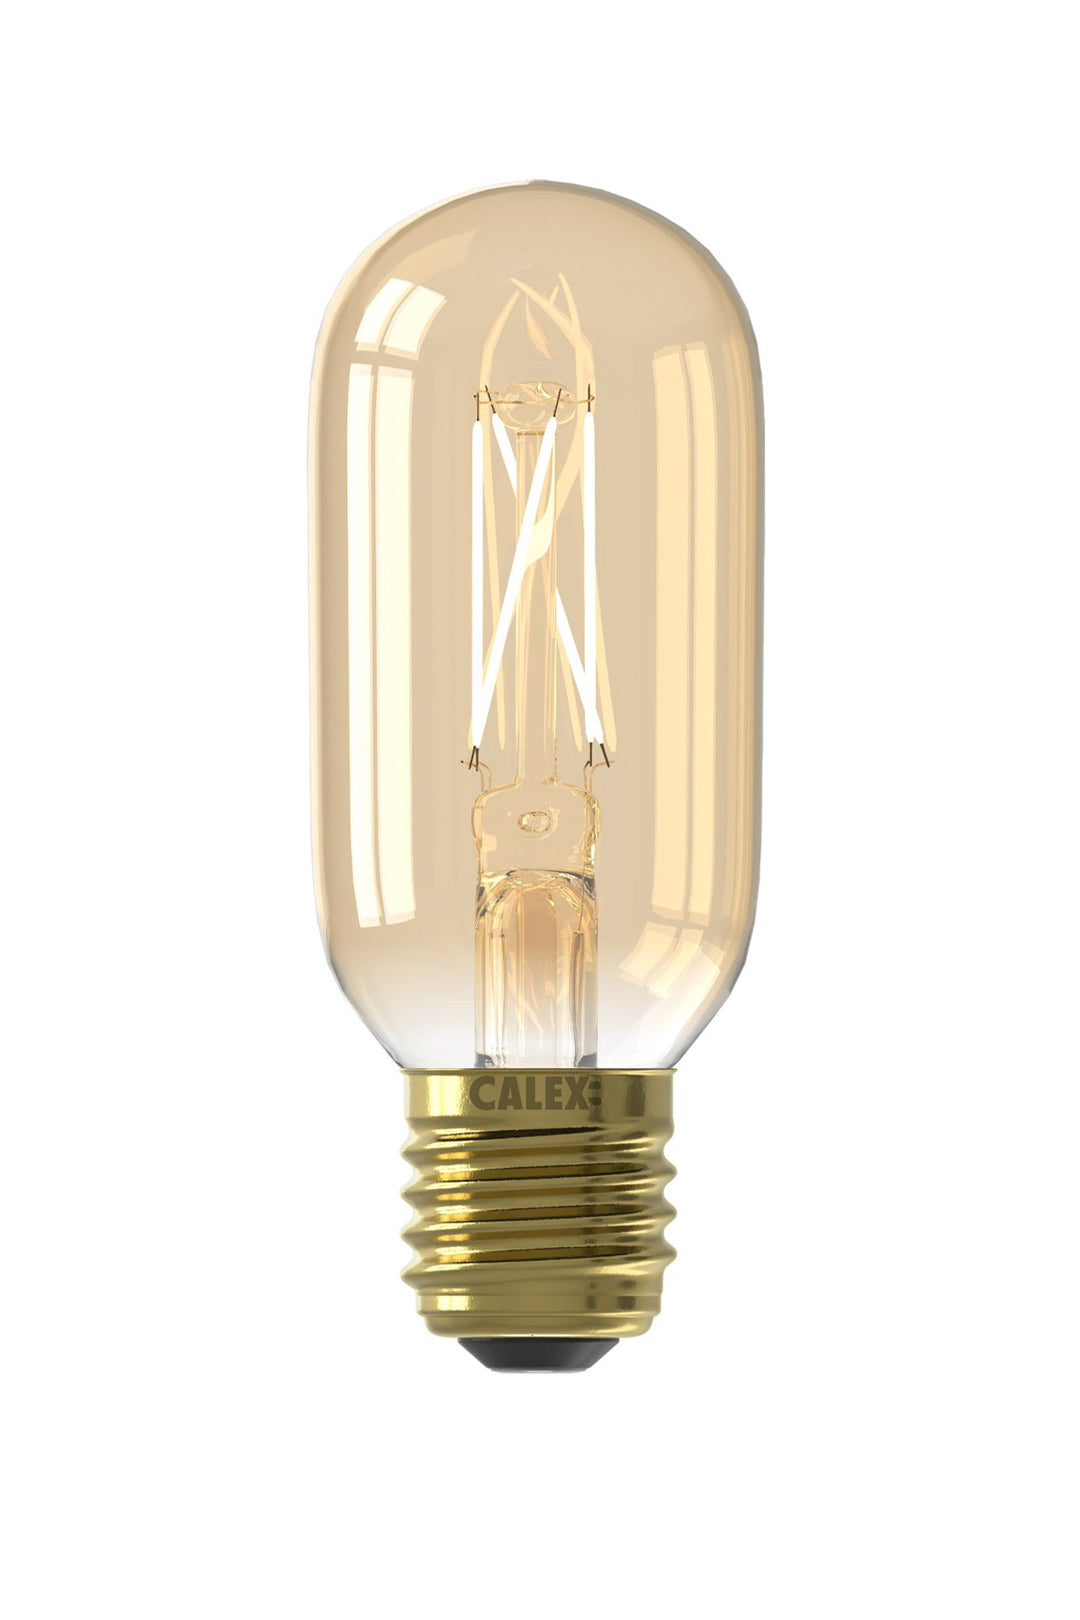 Calex LED Warm Filament Tube Lamp T45x110, Gold, E27, Dimmable 1101003900